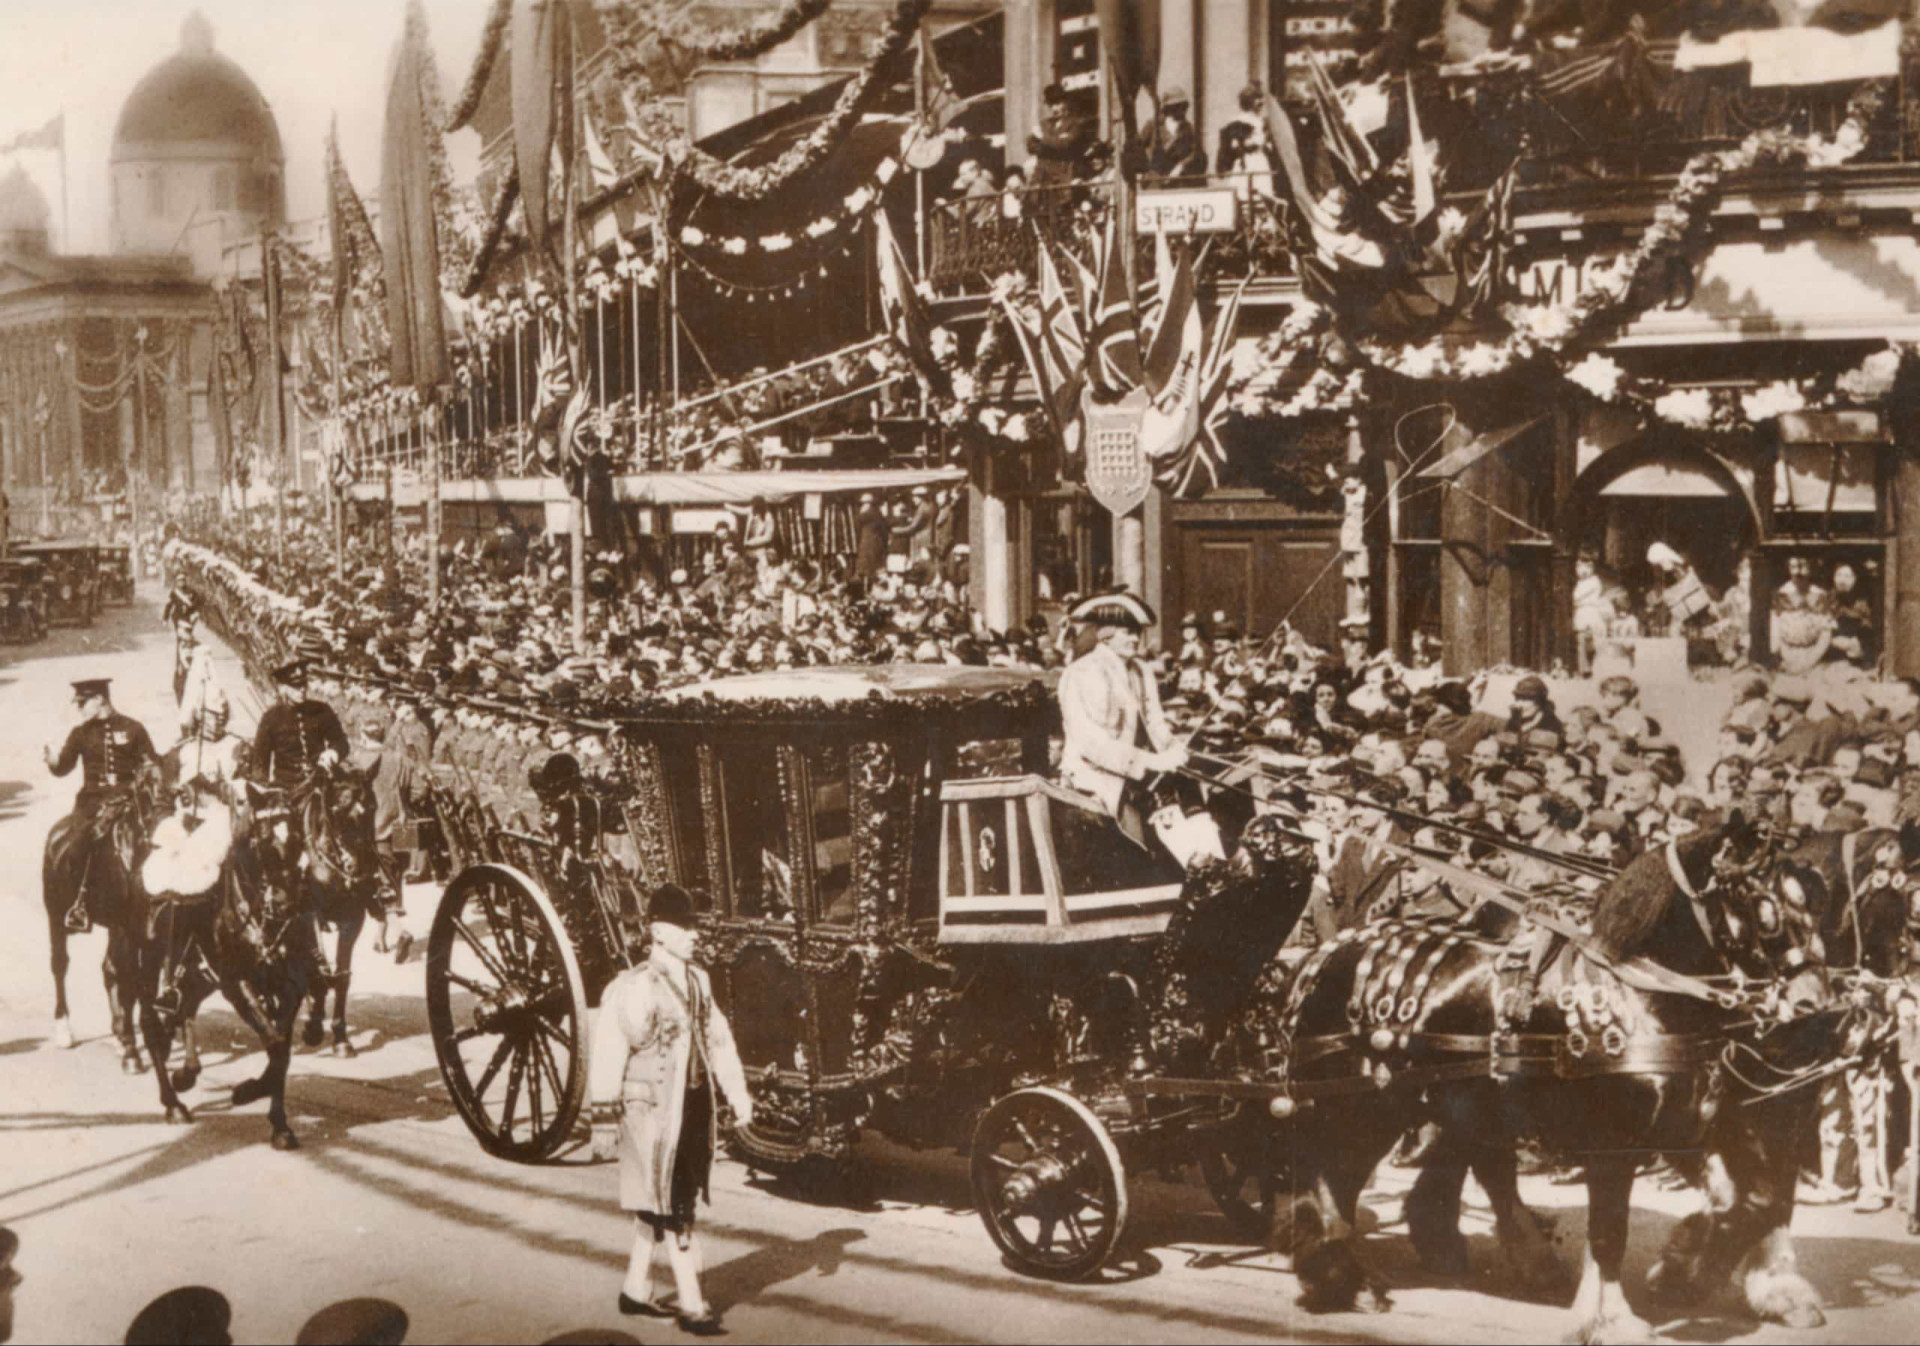 <p>The Speaker's Coach is the oldest of the three great State Coaches of the United Kingdom (the others being the Gold State Coach and the Lord Mayor's Coach). The coach was originally designed for King William III in 1698 and is still in use today. The coach is pictured in 1935 during the Silver Jubilee Procession of King George V and Queen Mary.</p><p><a href="https://www.msn.com/en-us/community/channel/vid-7xx8mnucu55yw63we9va2gwr7uihbxwc68fxqp25x6tg4ftibpra?cvid=94631541bc0f4f89bfd59158d696ad7e">Follow us and access great exclusive content every day</a></p>